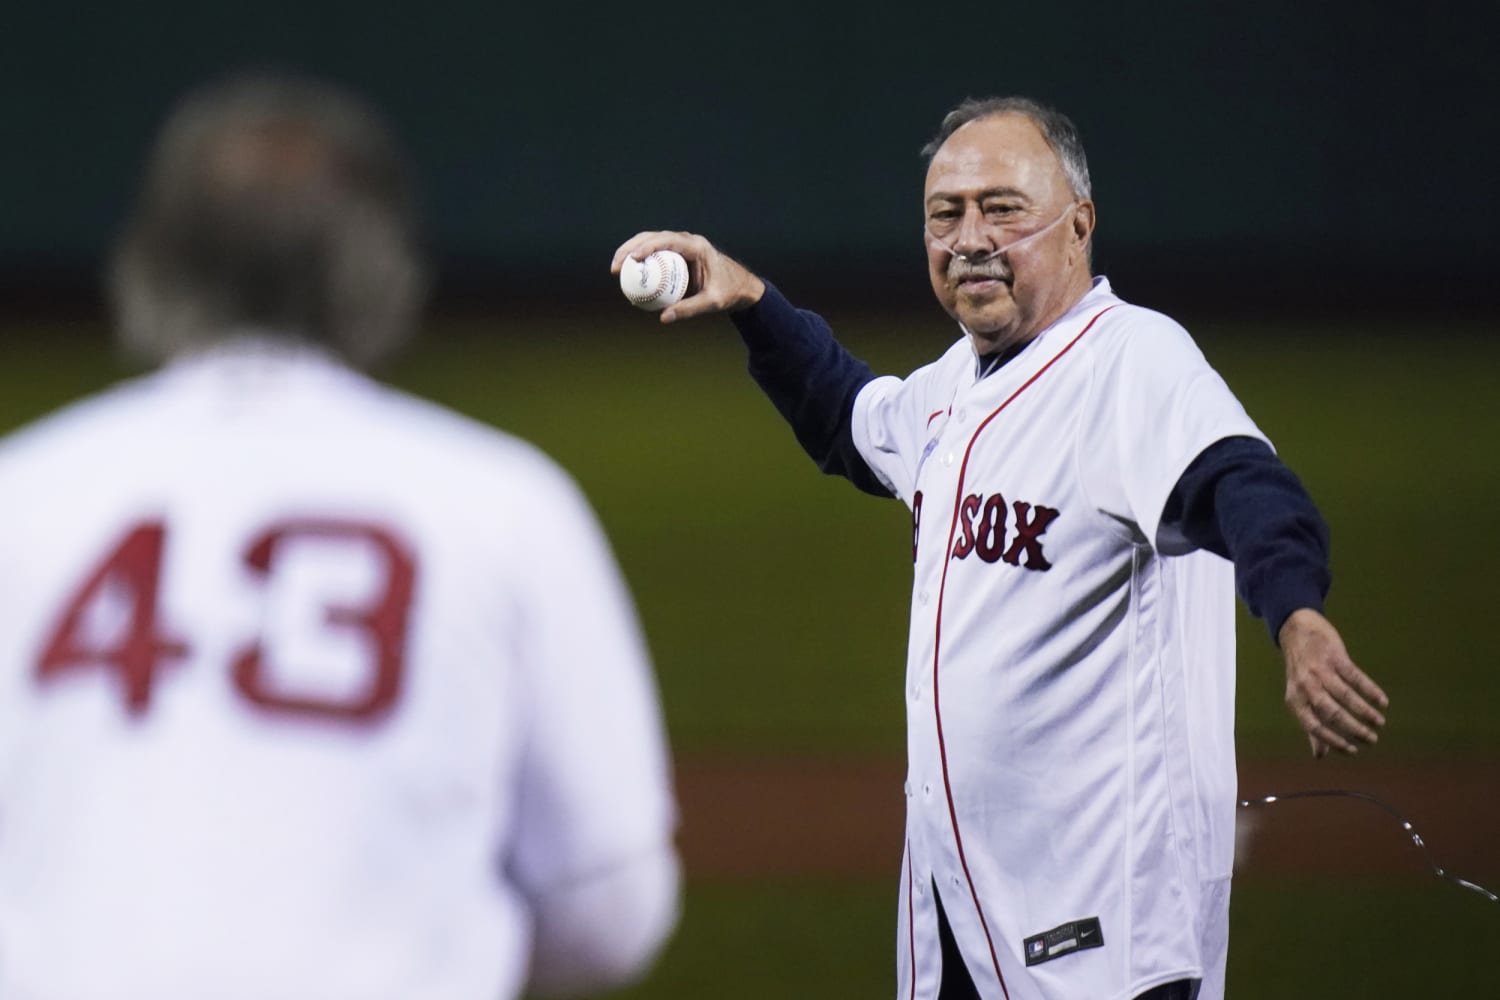 Red Sox players to wear commemorative patch in tribute to Jerry Remy